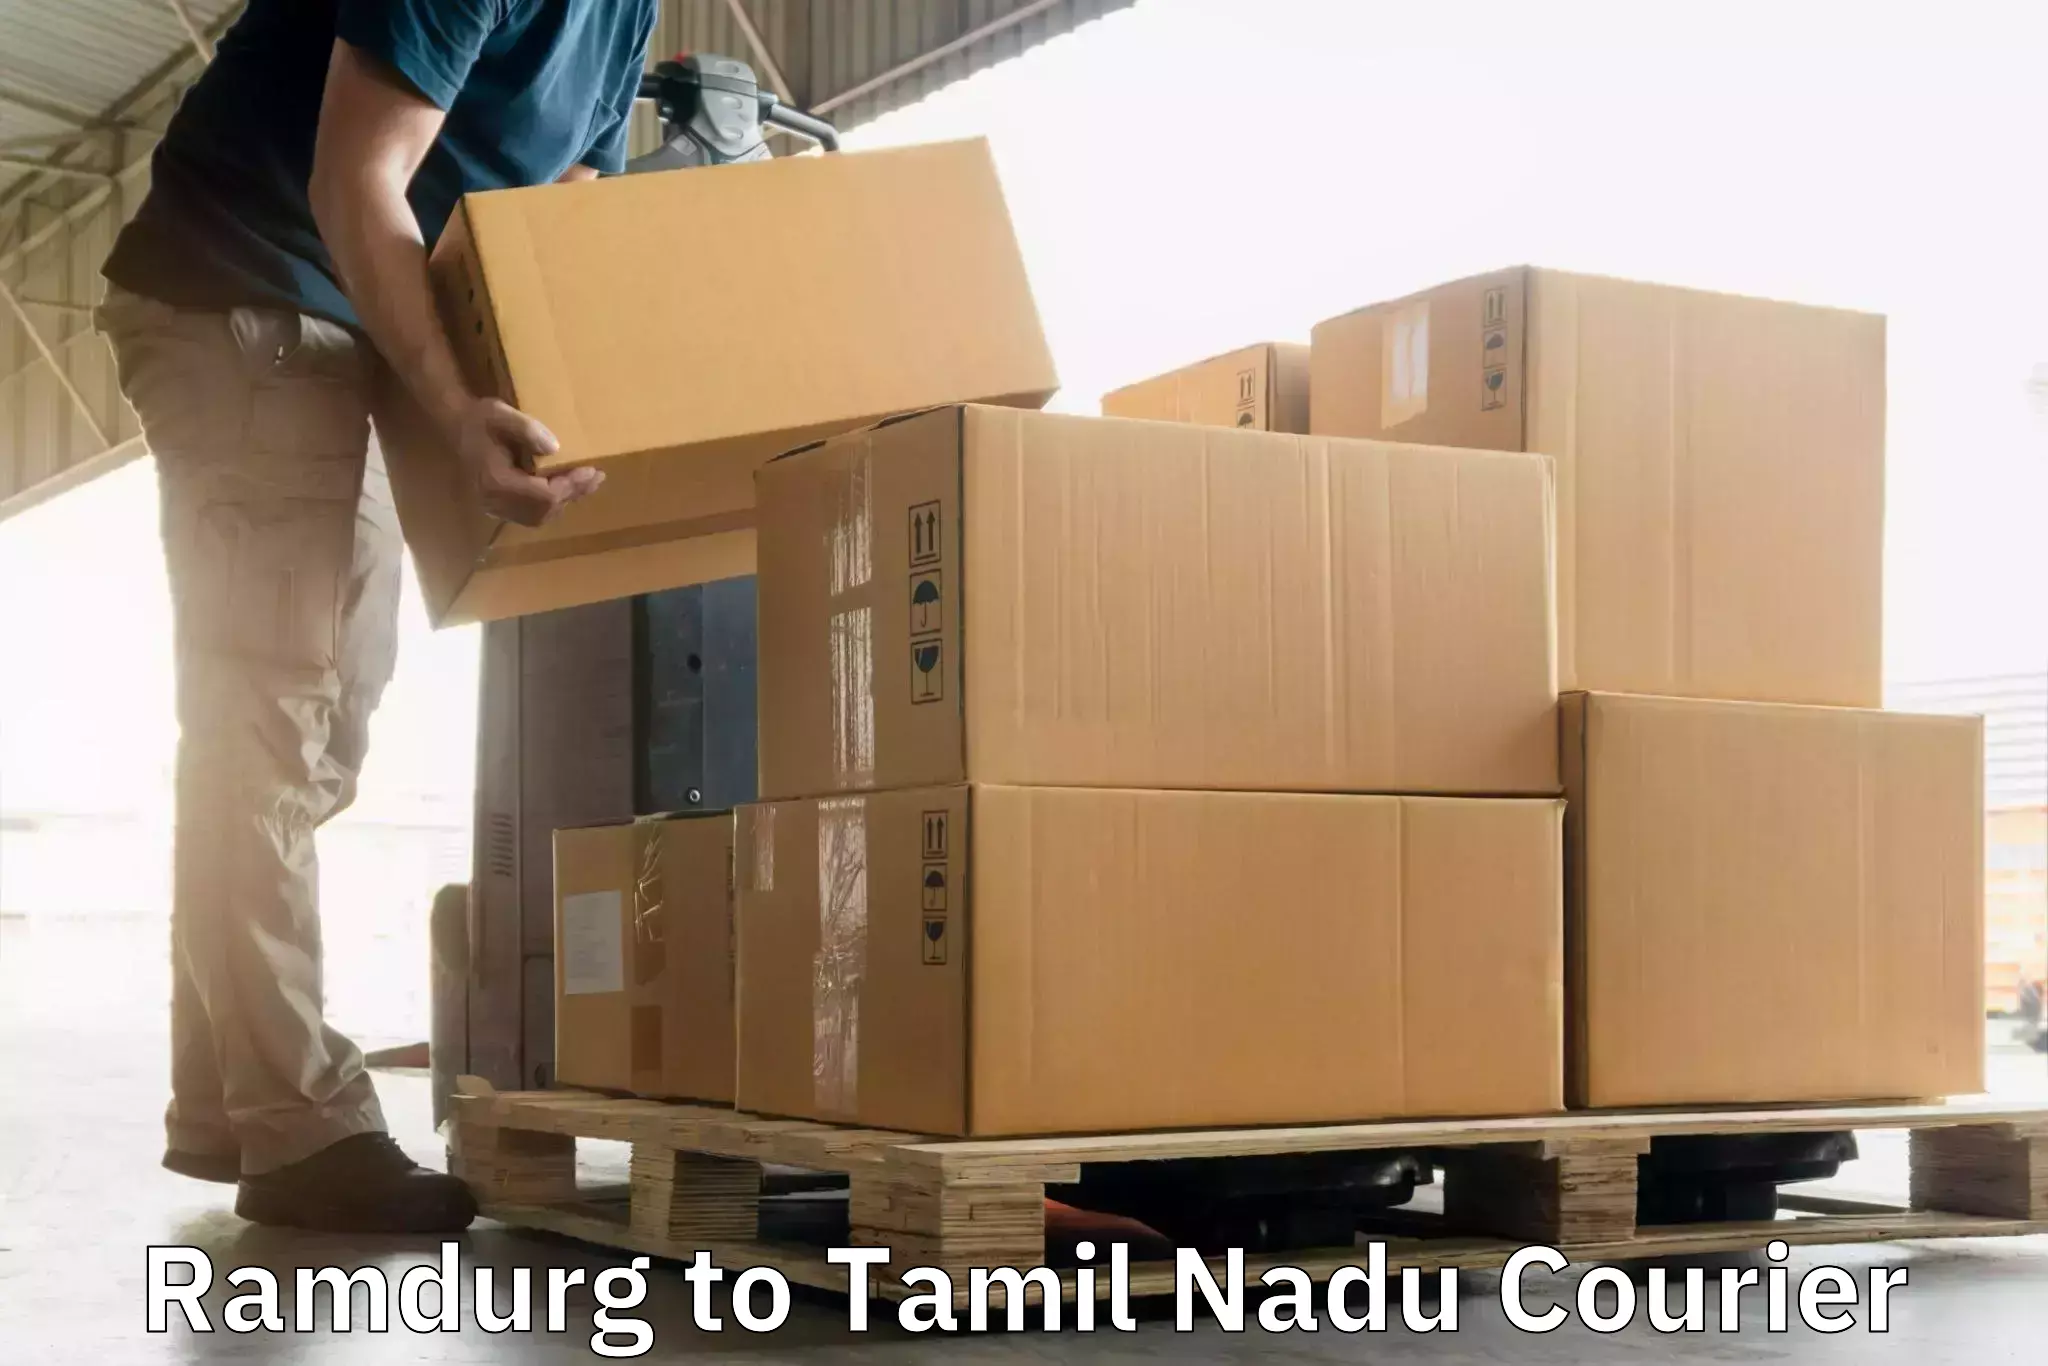 High-capacity parcel service Ramdurg to Vellore